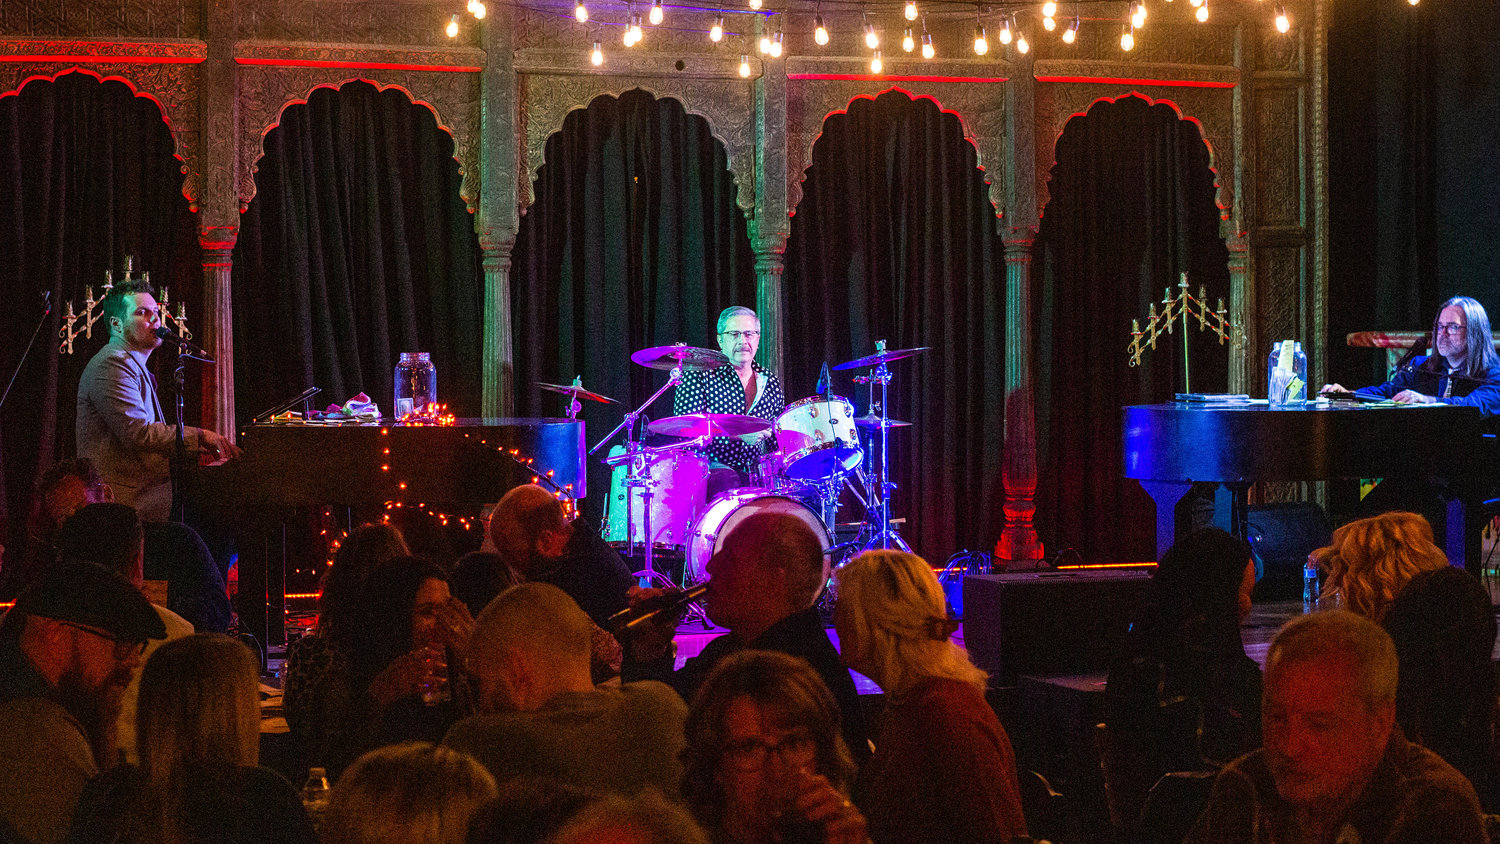 Dueling pianos perform during a Harmonies for Hope event raising money for the Boys and Girls Club of Lewis County at City Farm Chehalis. They are set to perform again at The Loft in Chehalis on Dec. 2.